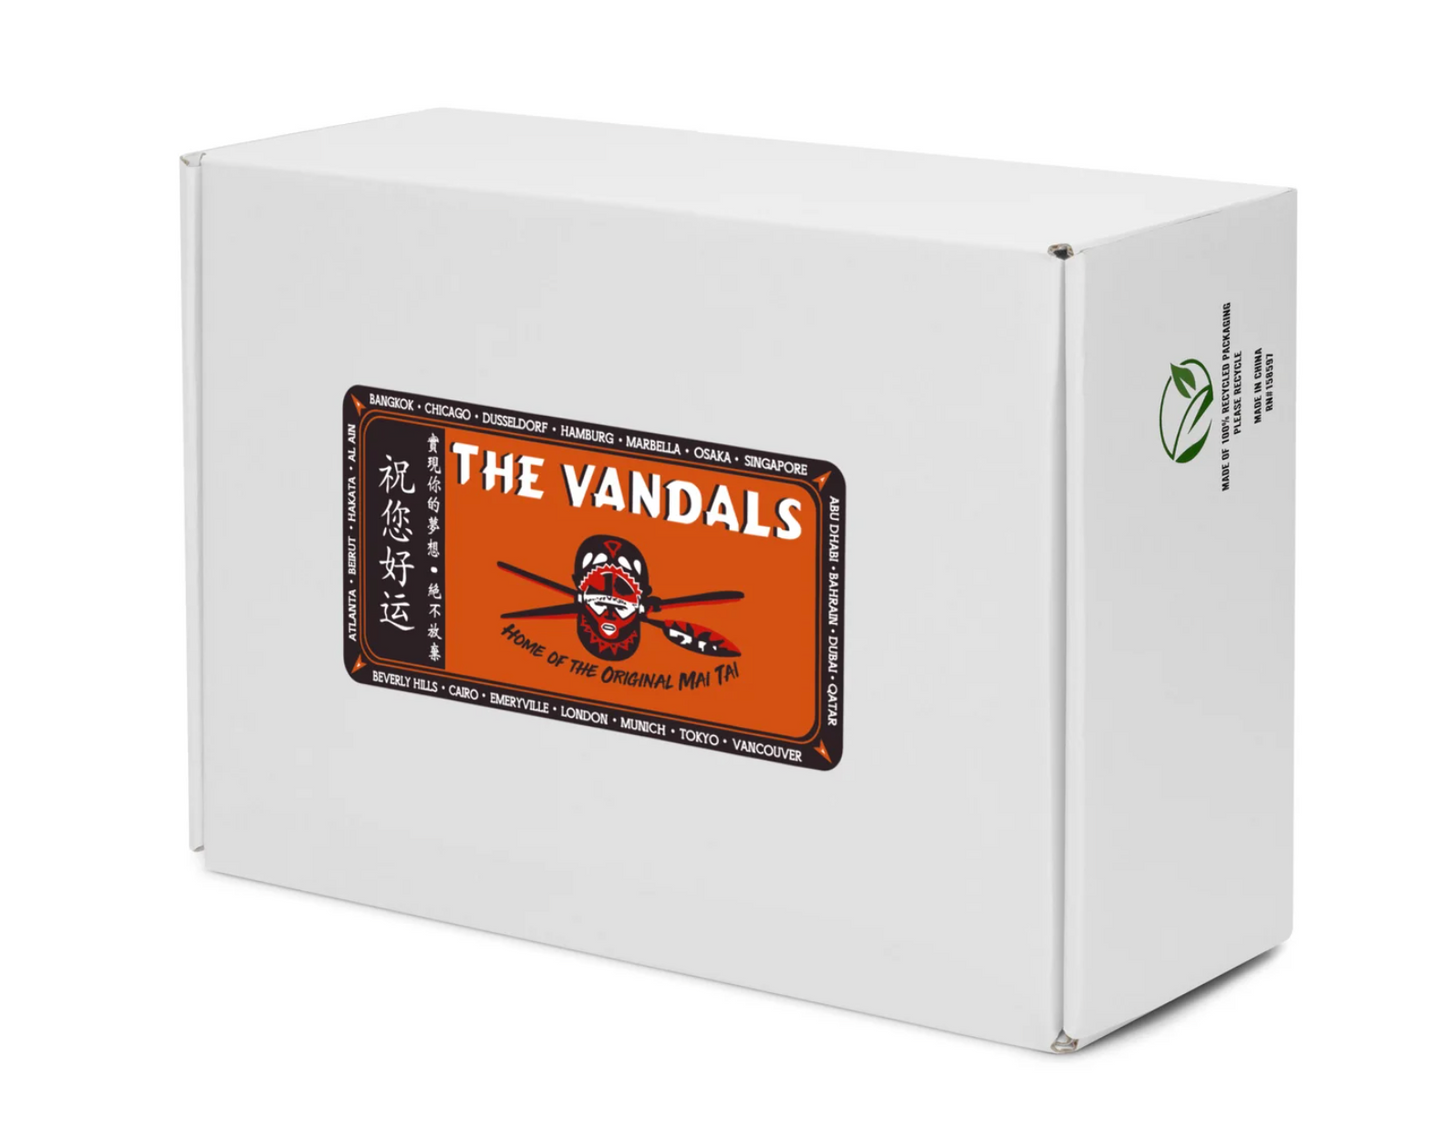 The Vandals High Top Sneaker for Men by Sergio Georgini